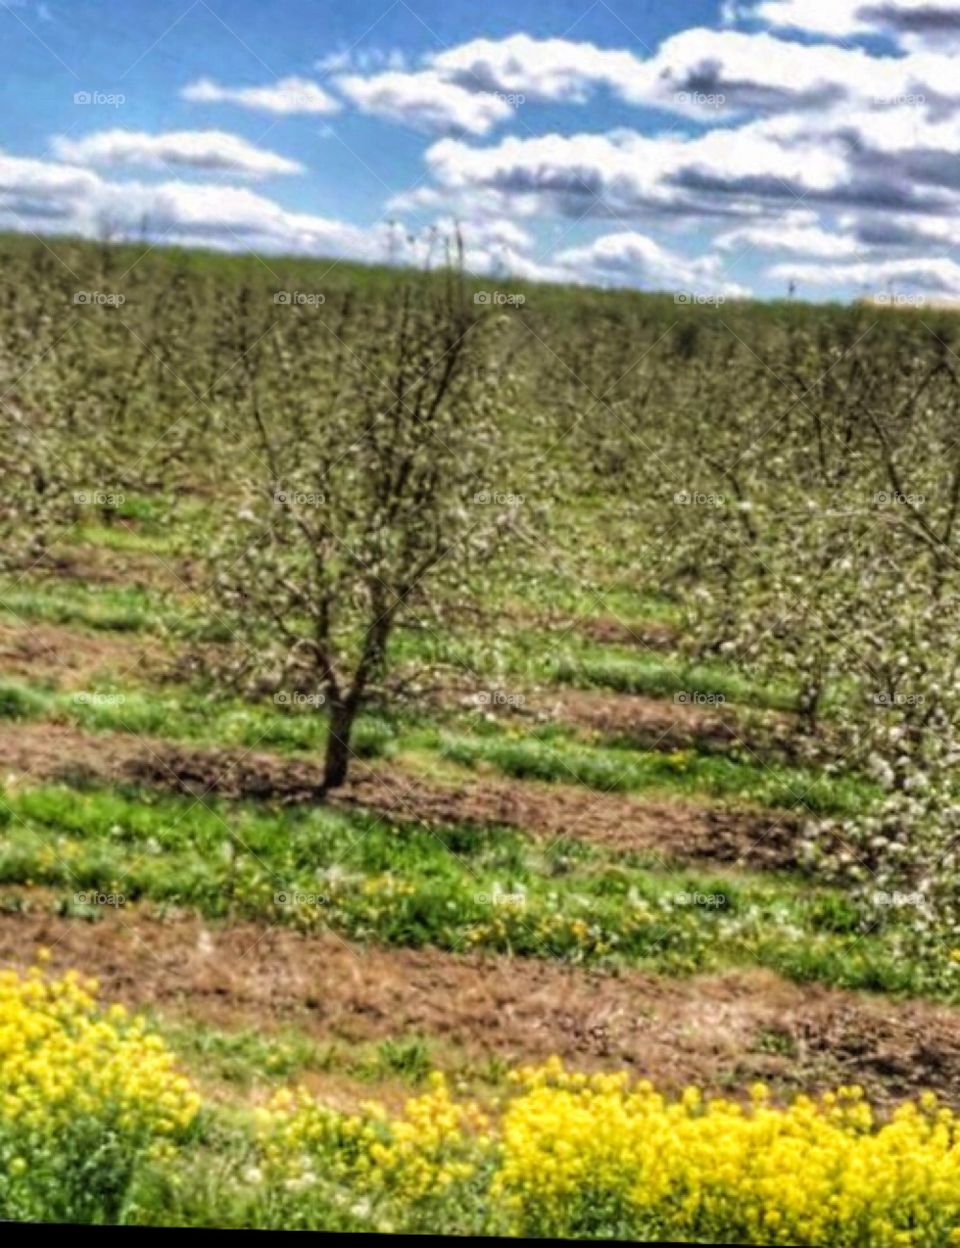 Apple orchards blooming in springtime 